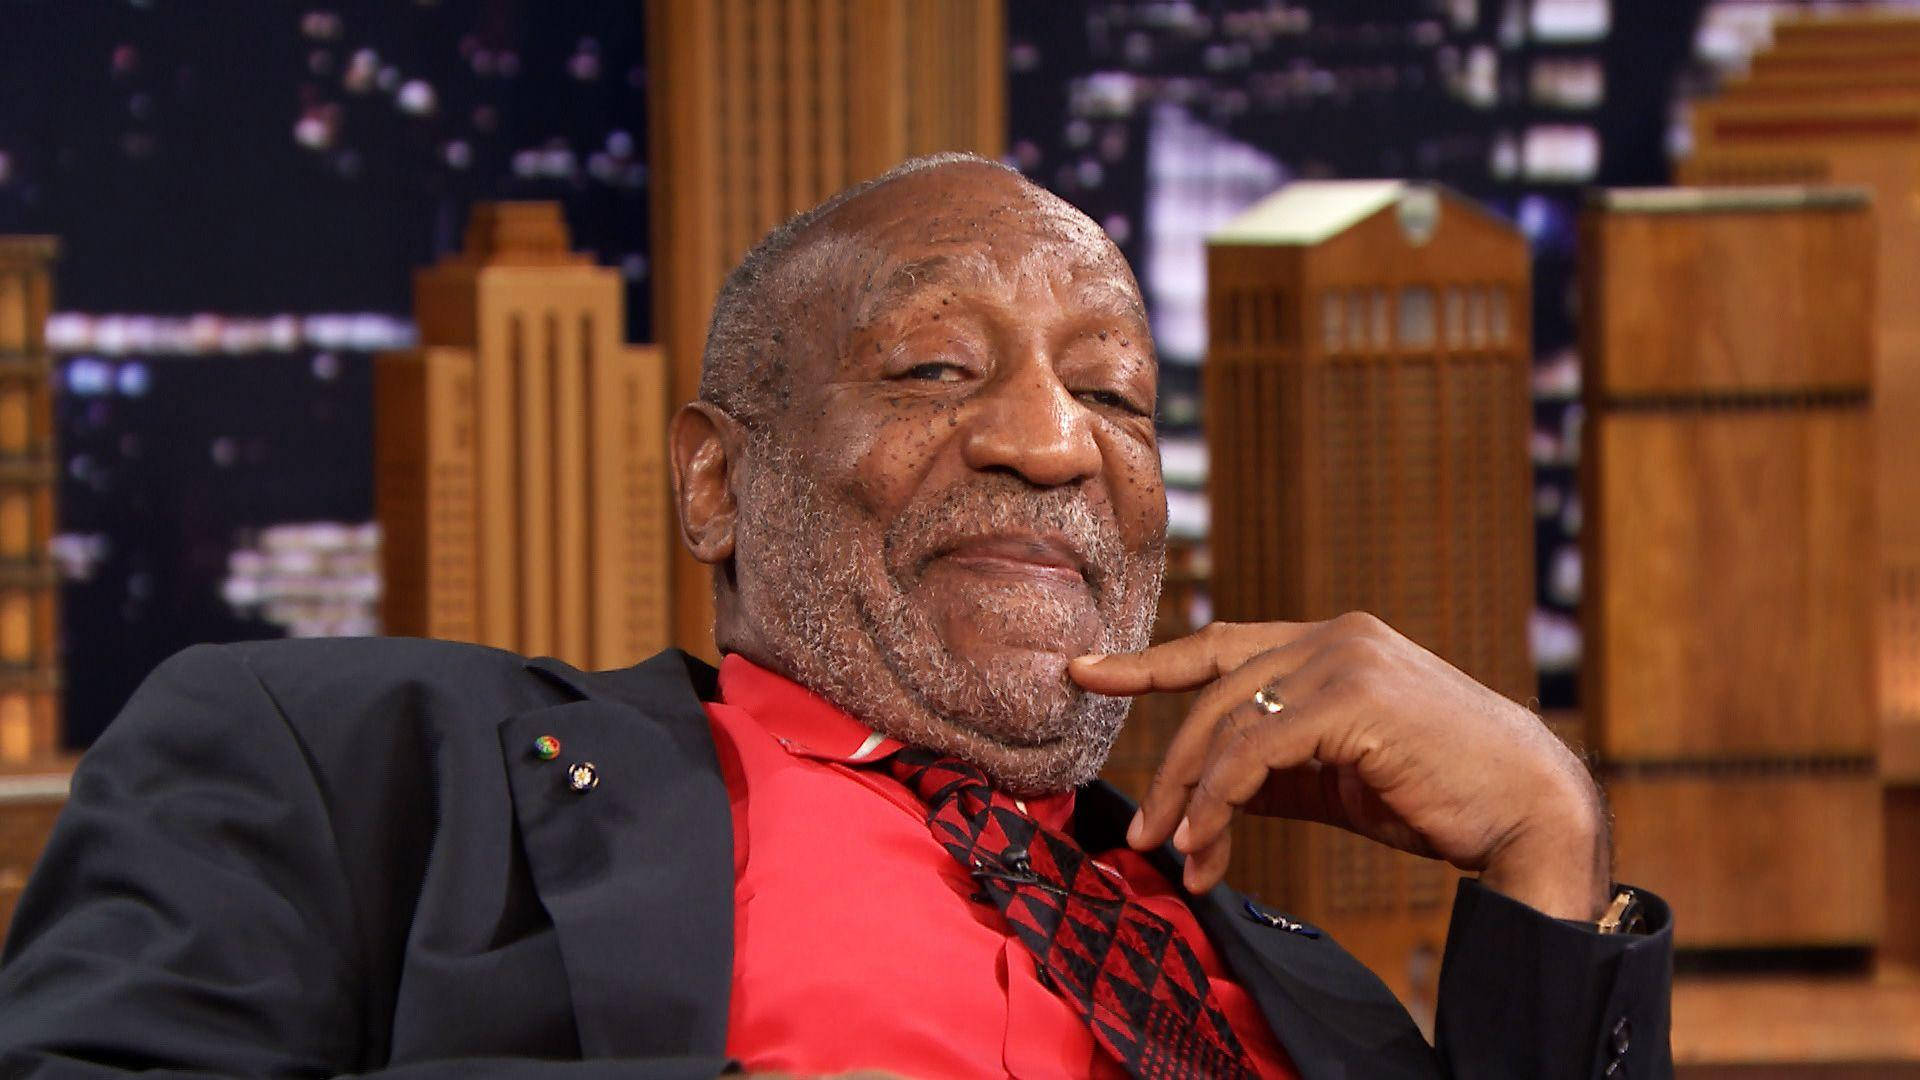 A Candid Smile From Bill Cosby